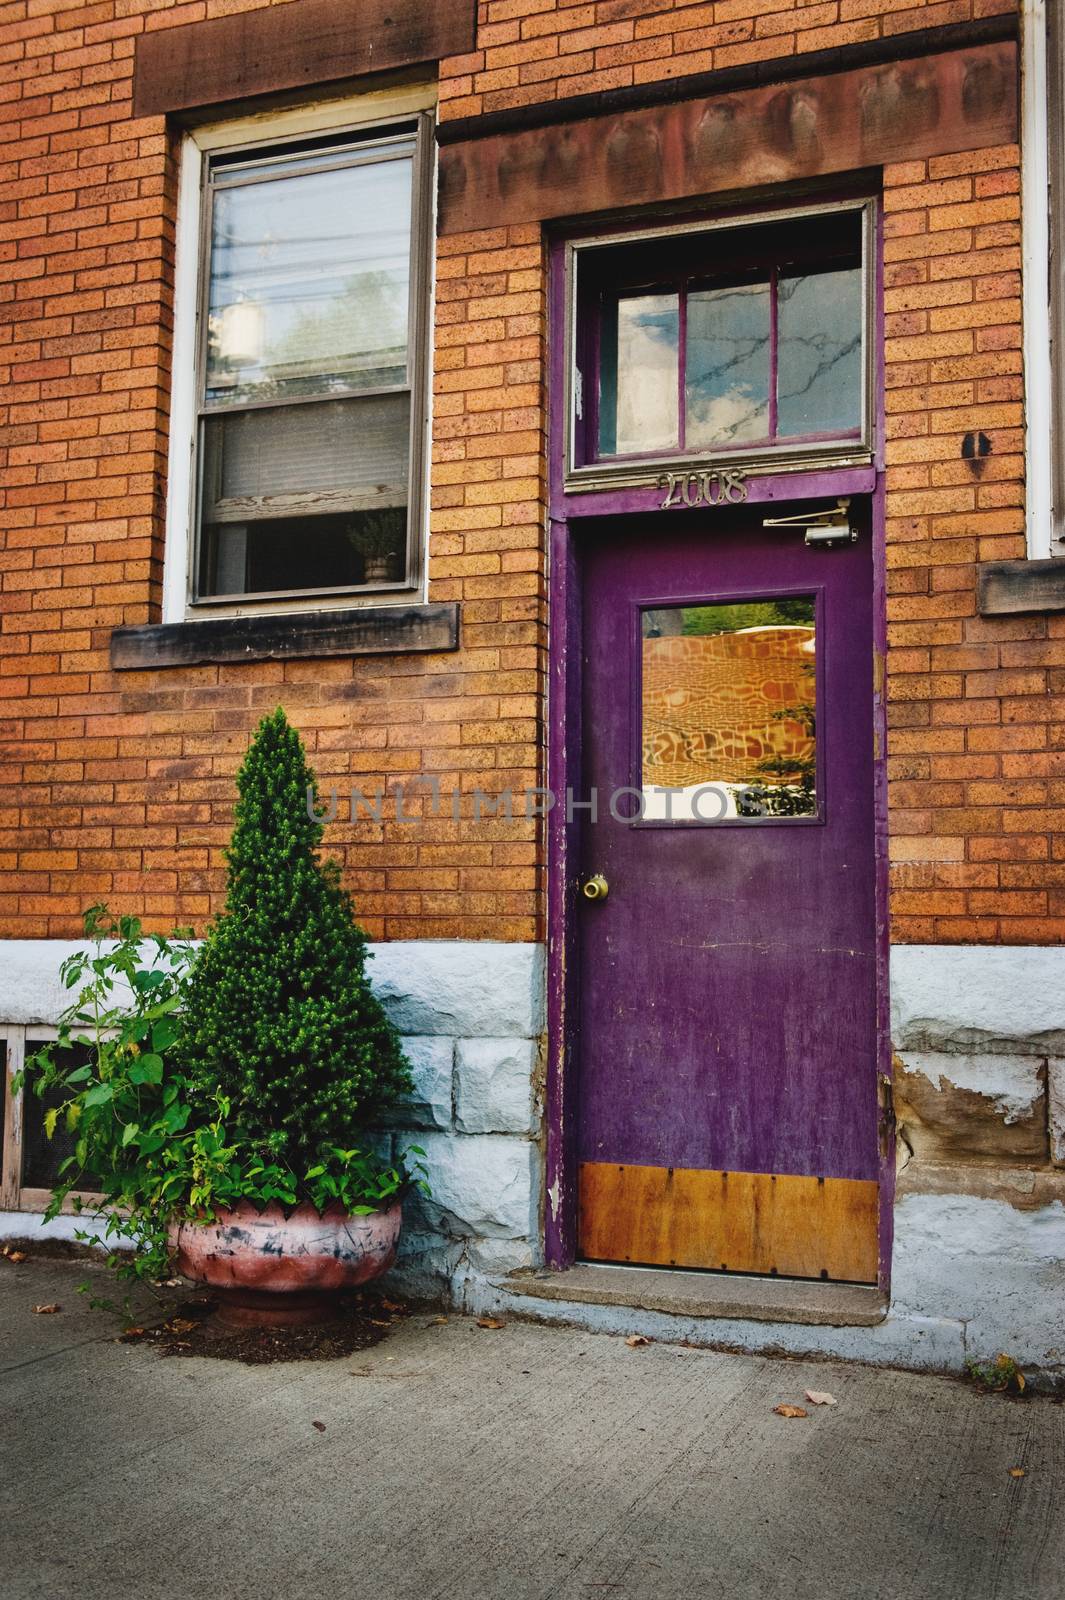 An image of a unique, colorful and purple doorway